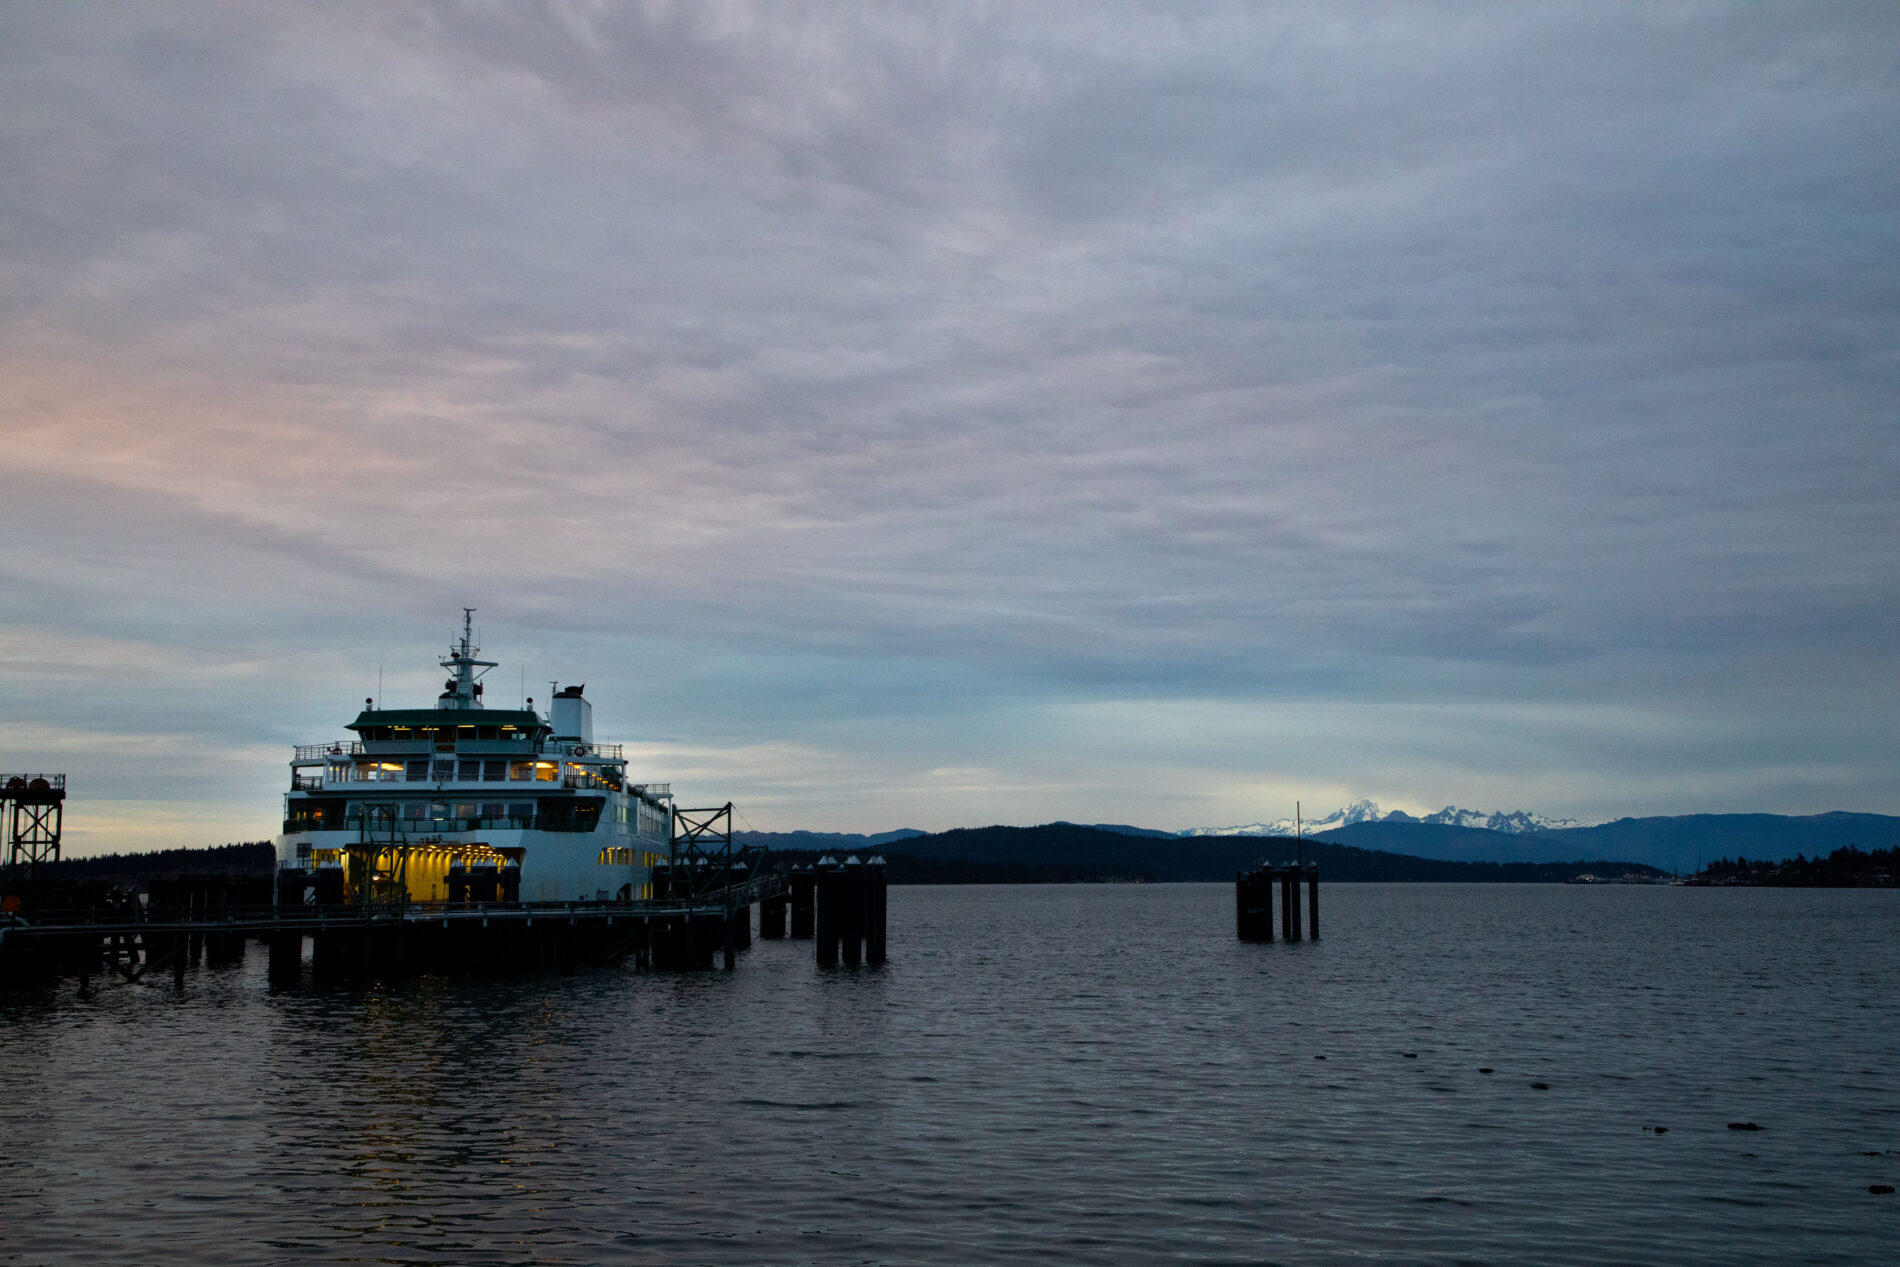 Taking a day trip to the San Juan Islands, you'll want to catch the early ferry from Anacortes.